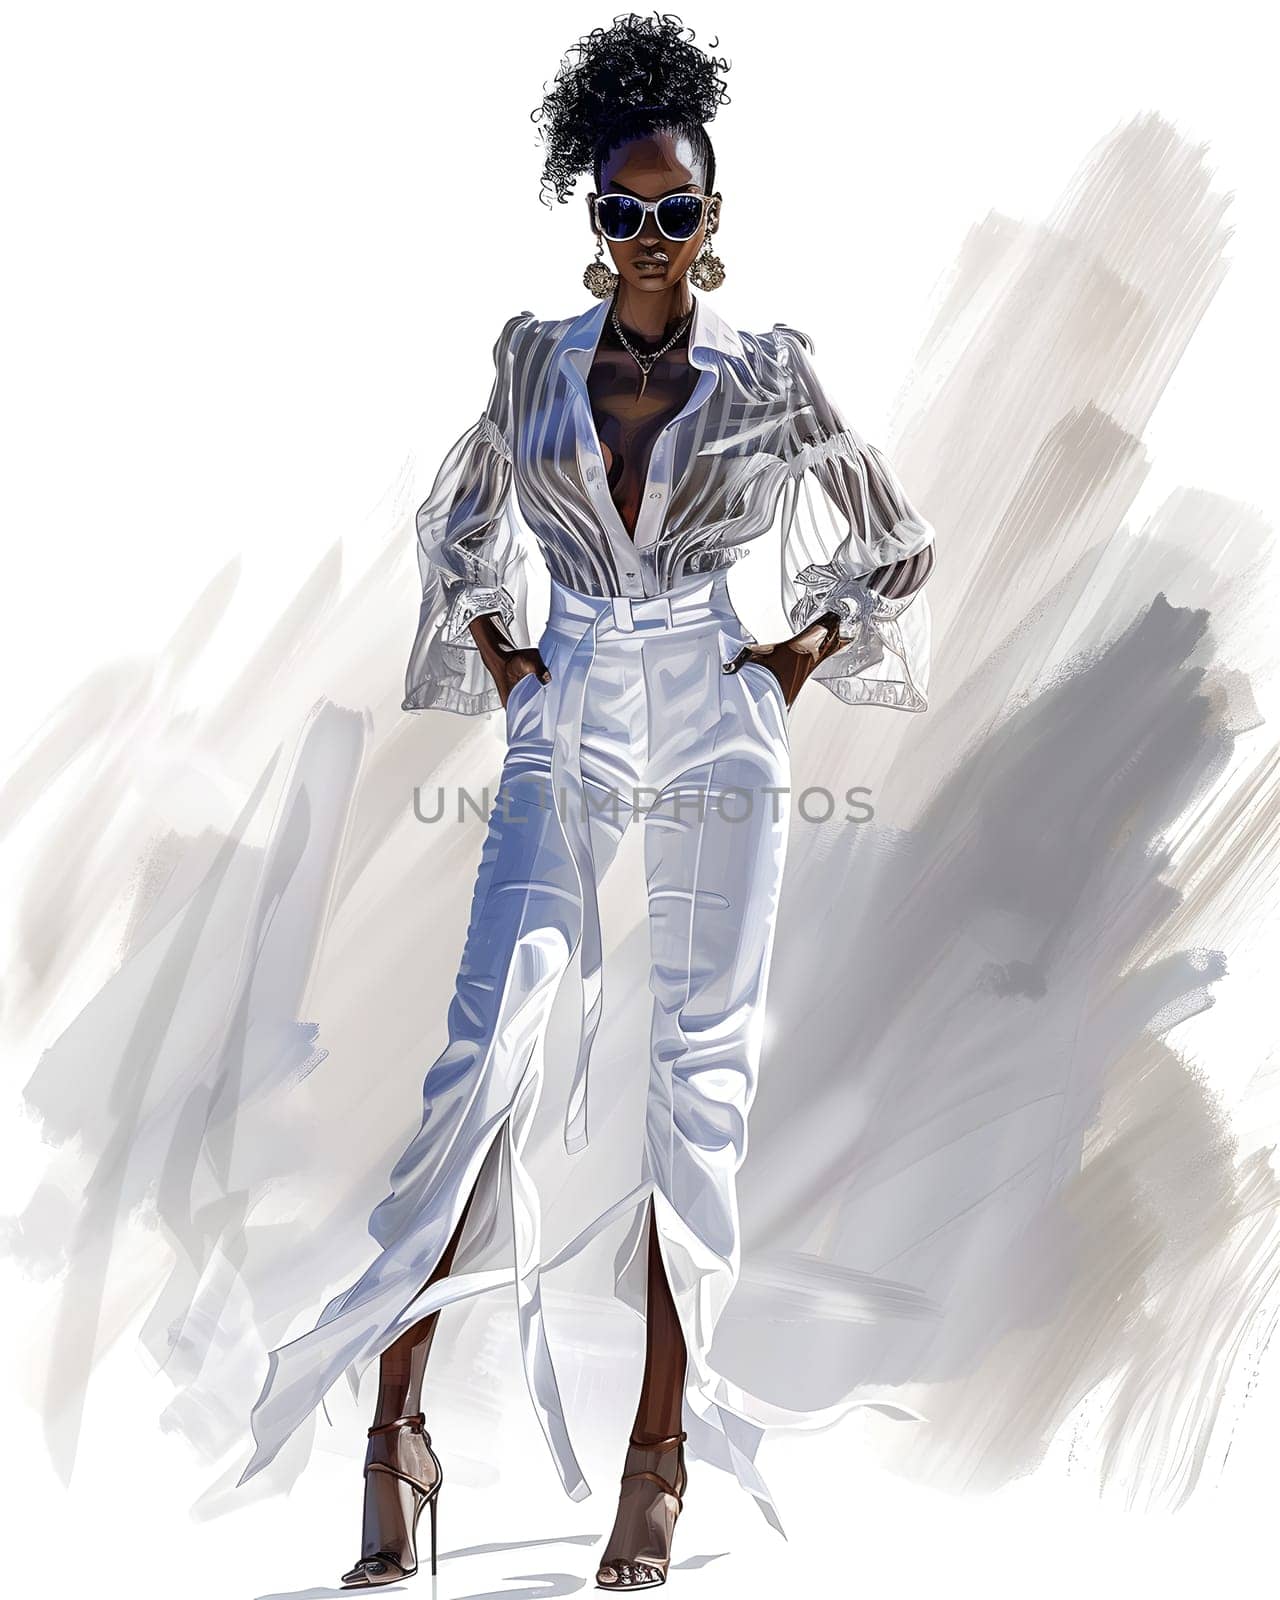 A woman in a white dress and sunglasses, showcasing fashion design and art by Nadtochiy